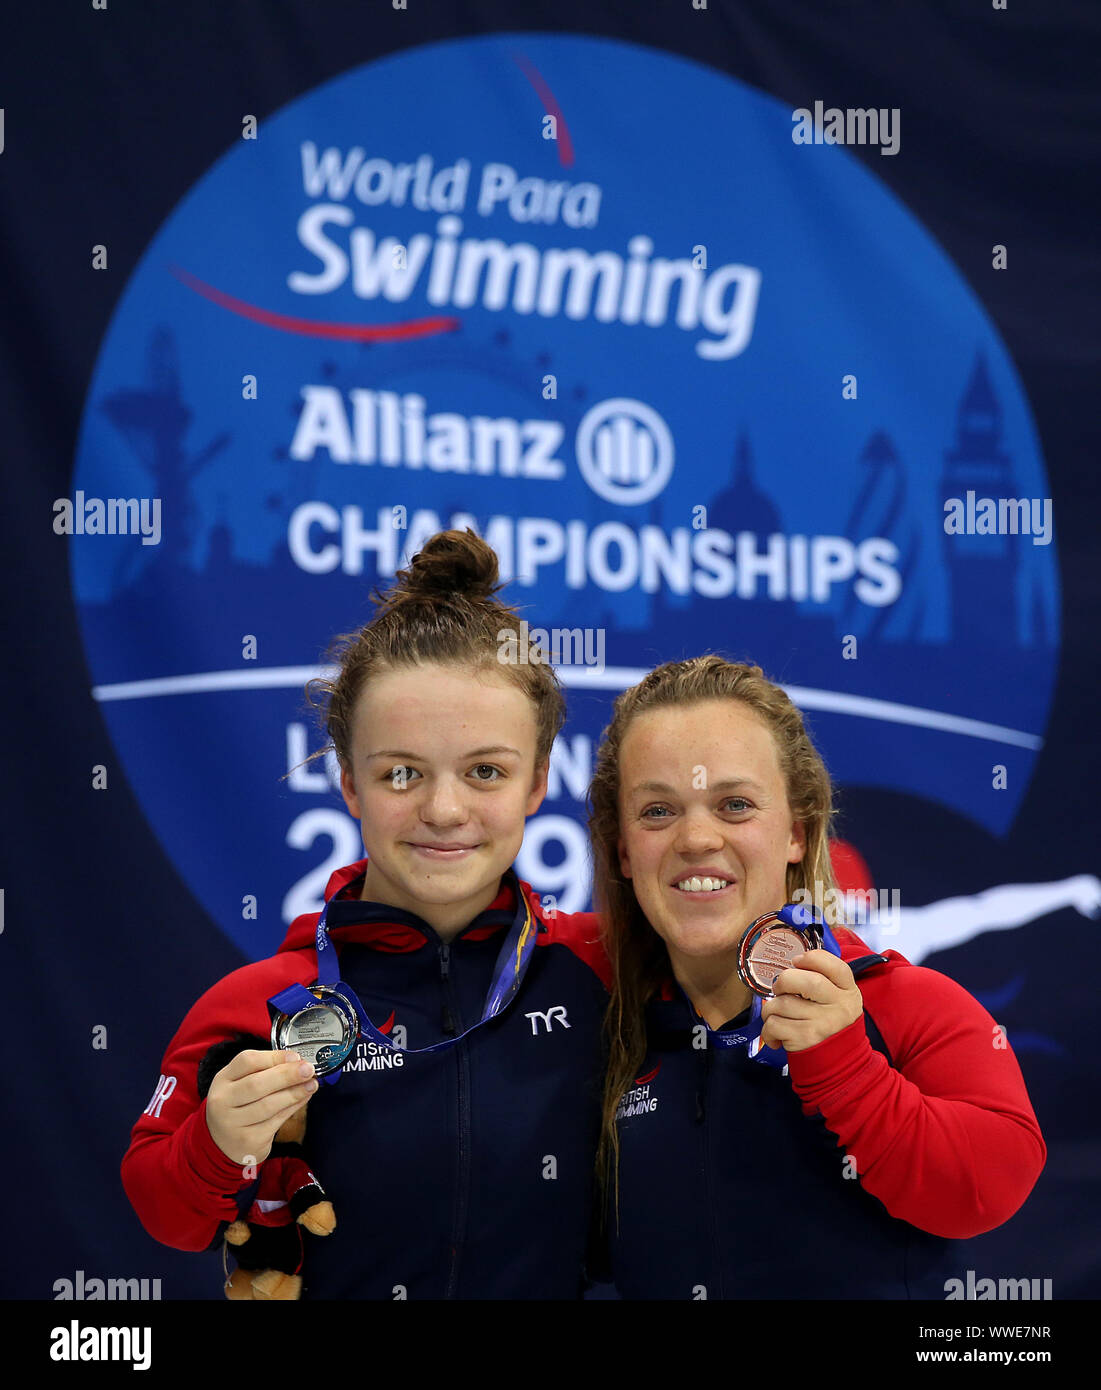 Great Britain's Maisie Summers-Newton and Eleanor Simmonds pose with their Siver and bronze medals in the Women's 100m Breaststroke SB6 Final during day seven of the World Para Swimming Allianz Championships at The London Aquatic Centre, London. Stock Photo